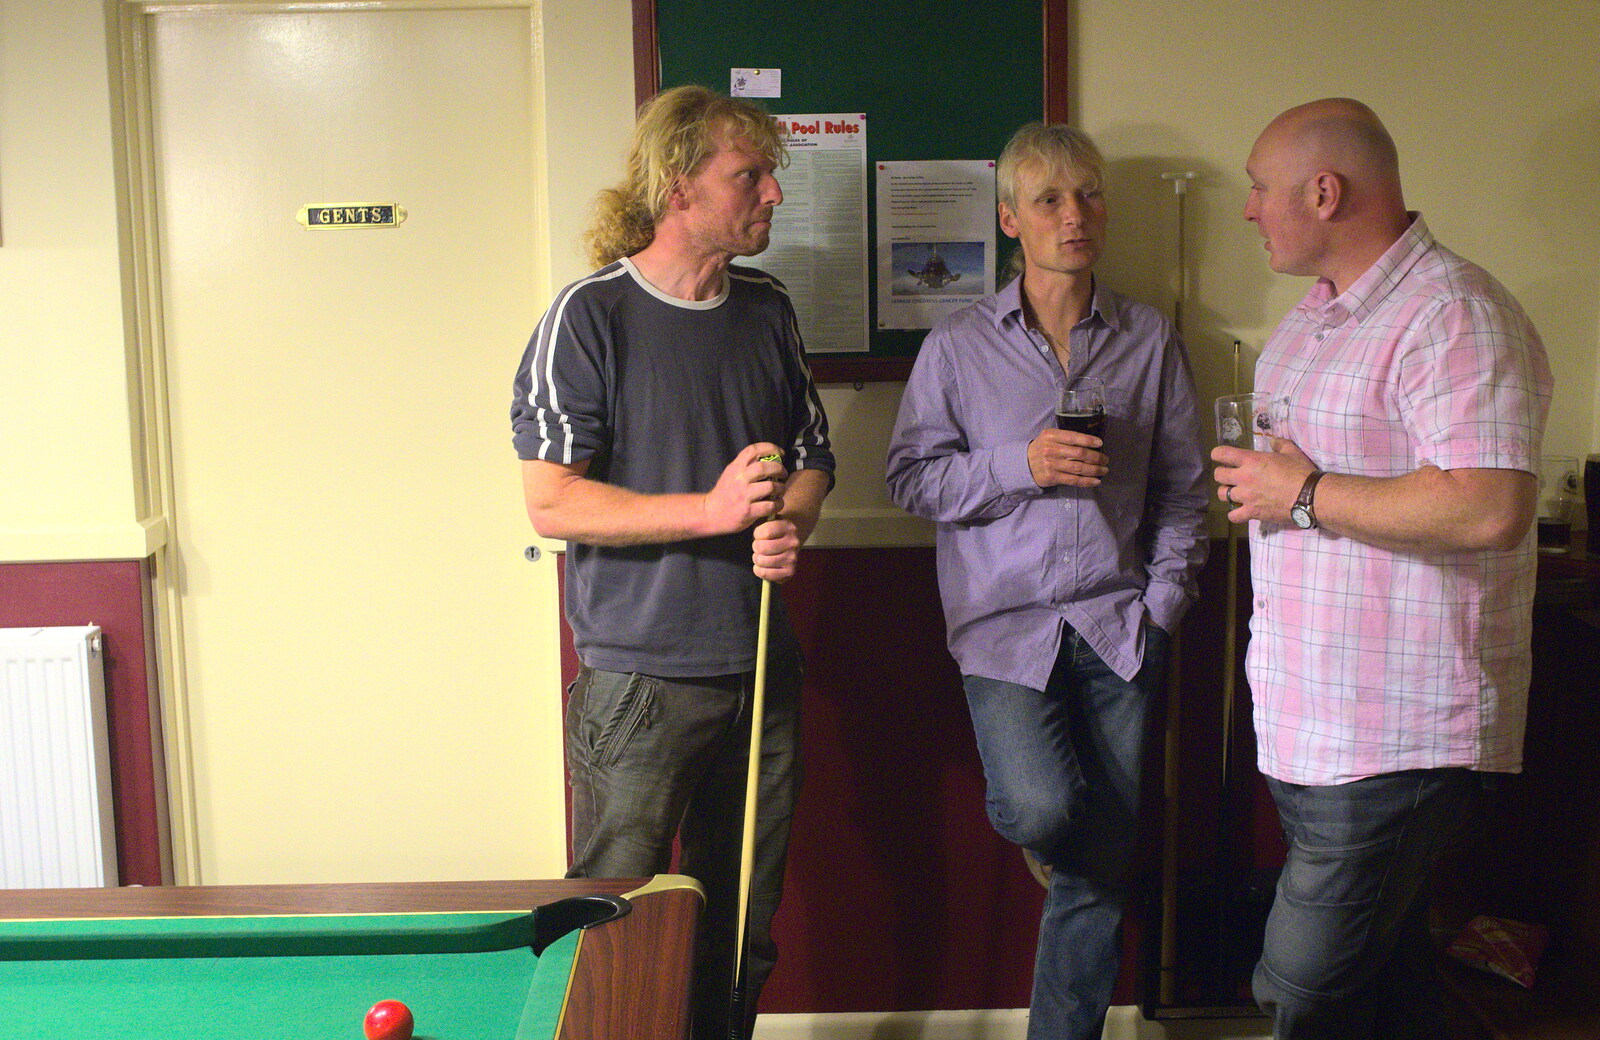 Wavy, Jimmy and Gov chat in the corner from Stick Game at the Cross Keys, Redgrave, Suffolk - 20th July 2012